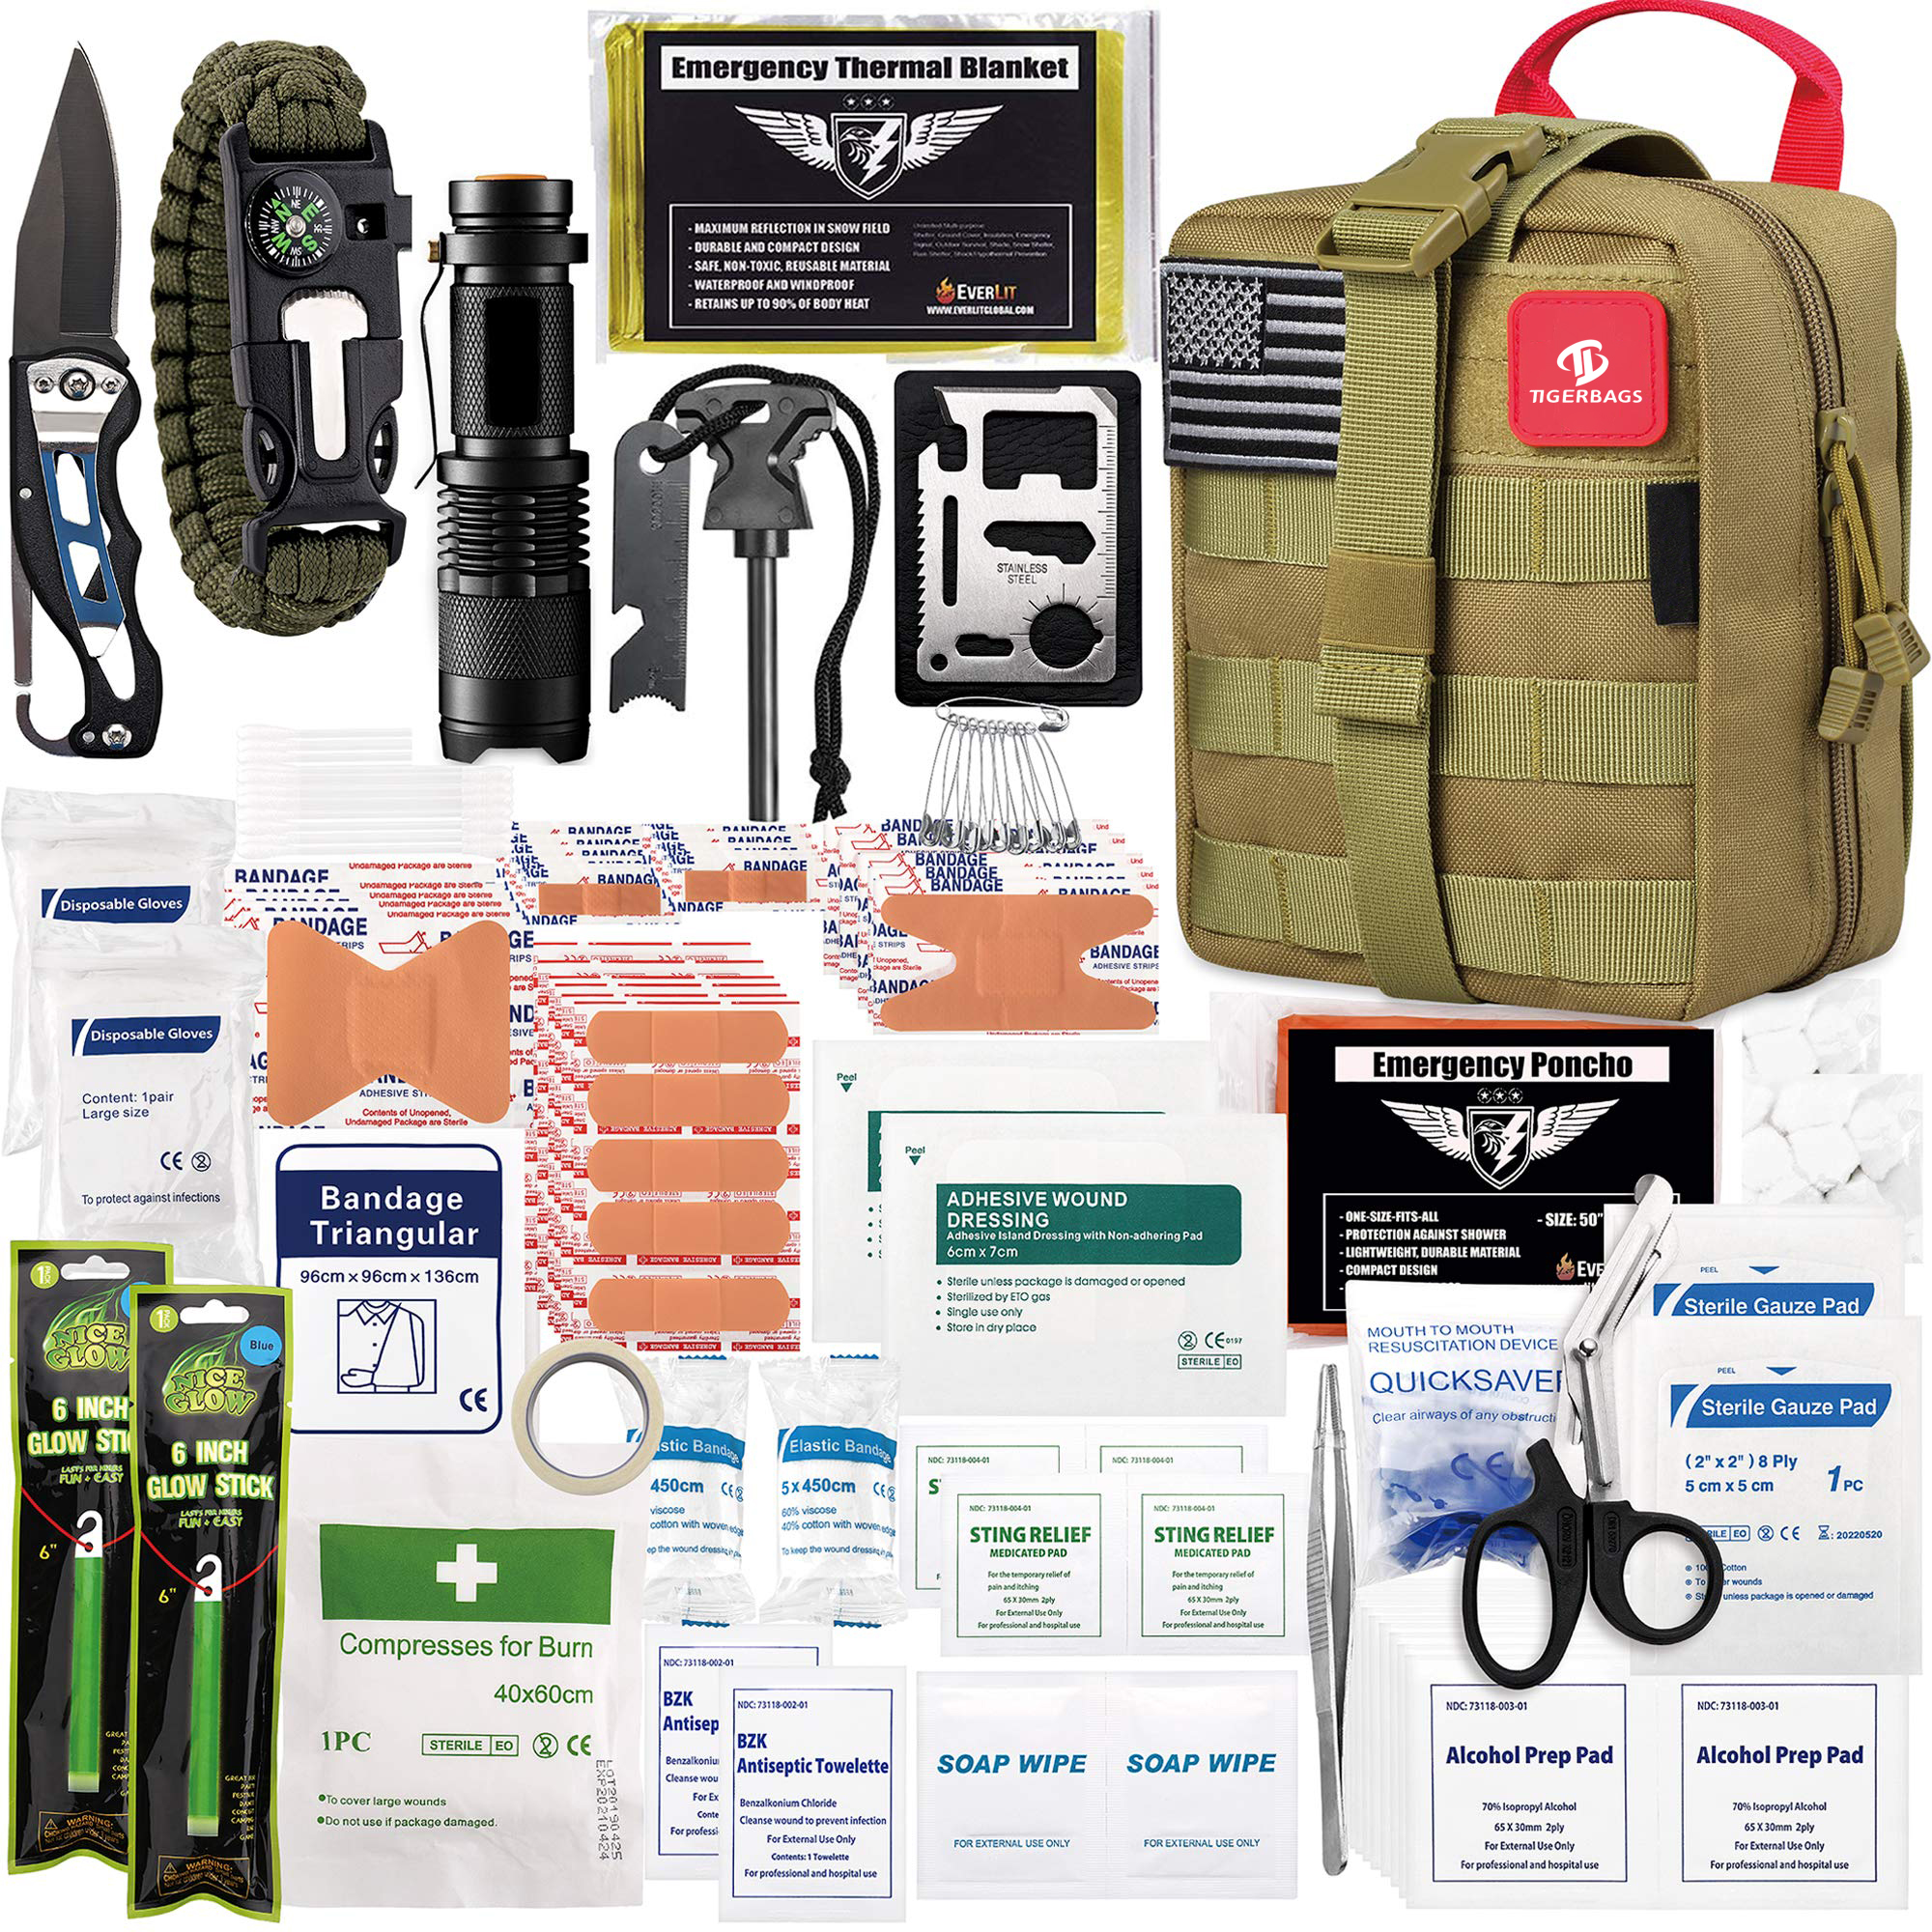 Survival Survival first aid kit Outdoor gear emergency kit Trauma